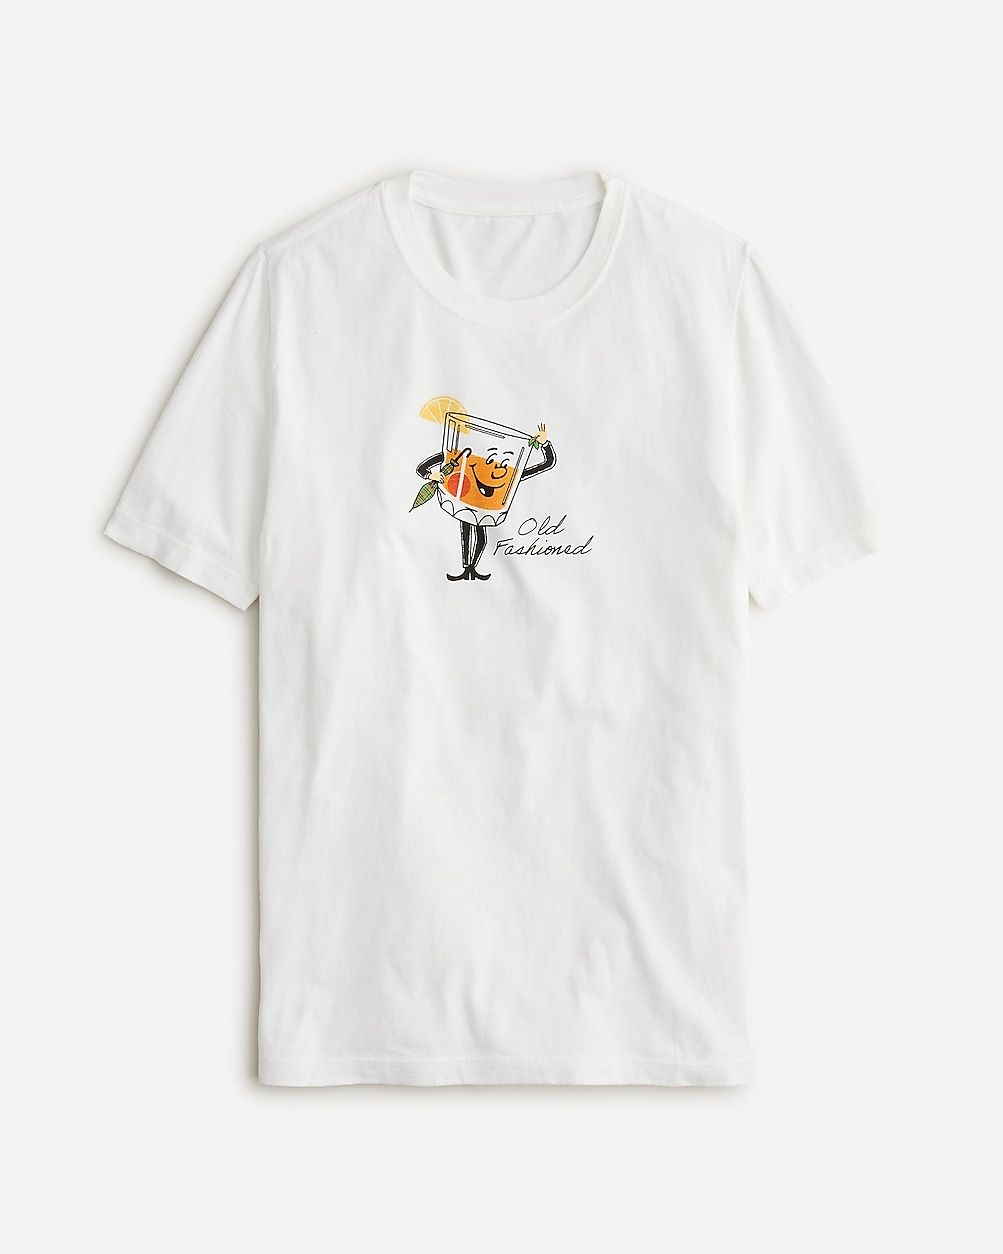 Made-in-the-USA old-fashioned graphic T-shirt | J.Crew US